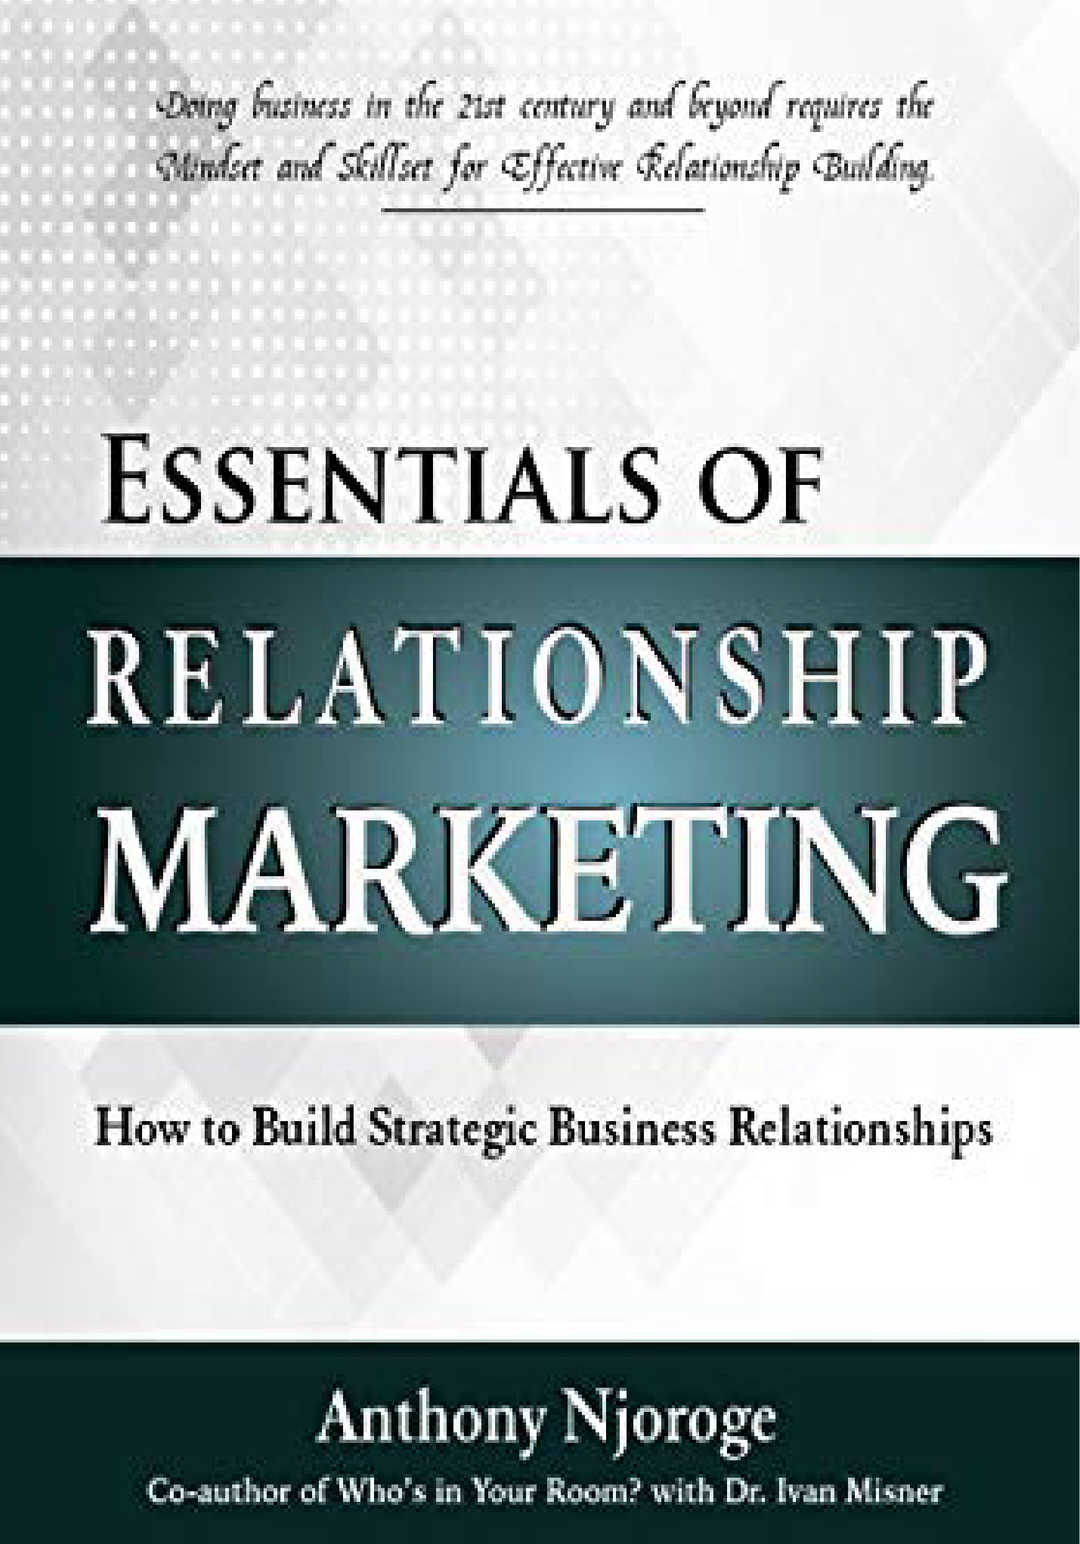 ESSENTIALS OF RELATIONSHIP MARKETING: How to Build Strategic Business Relationships